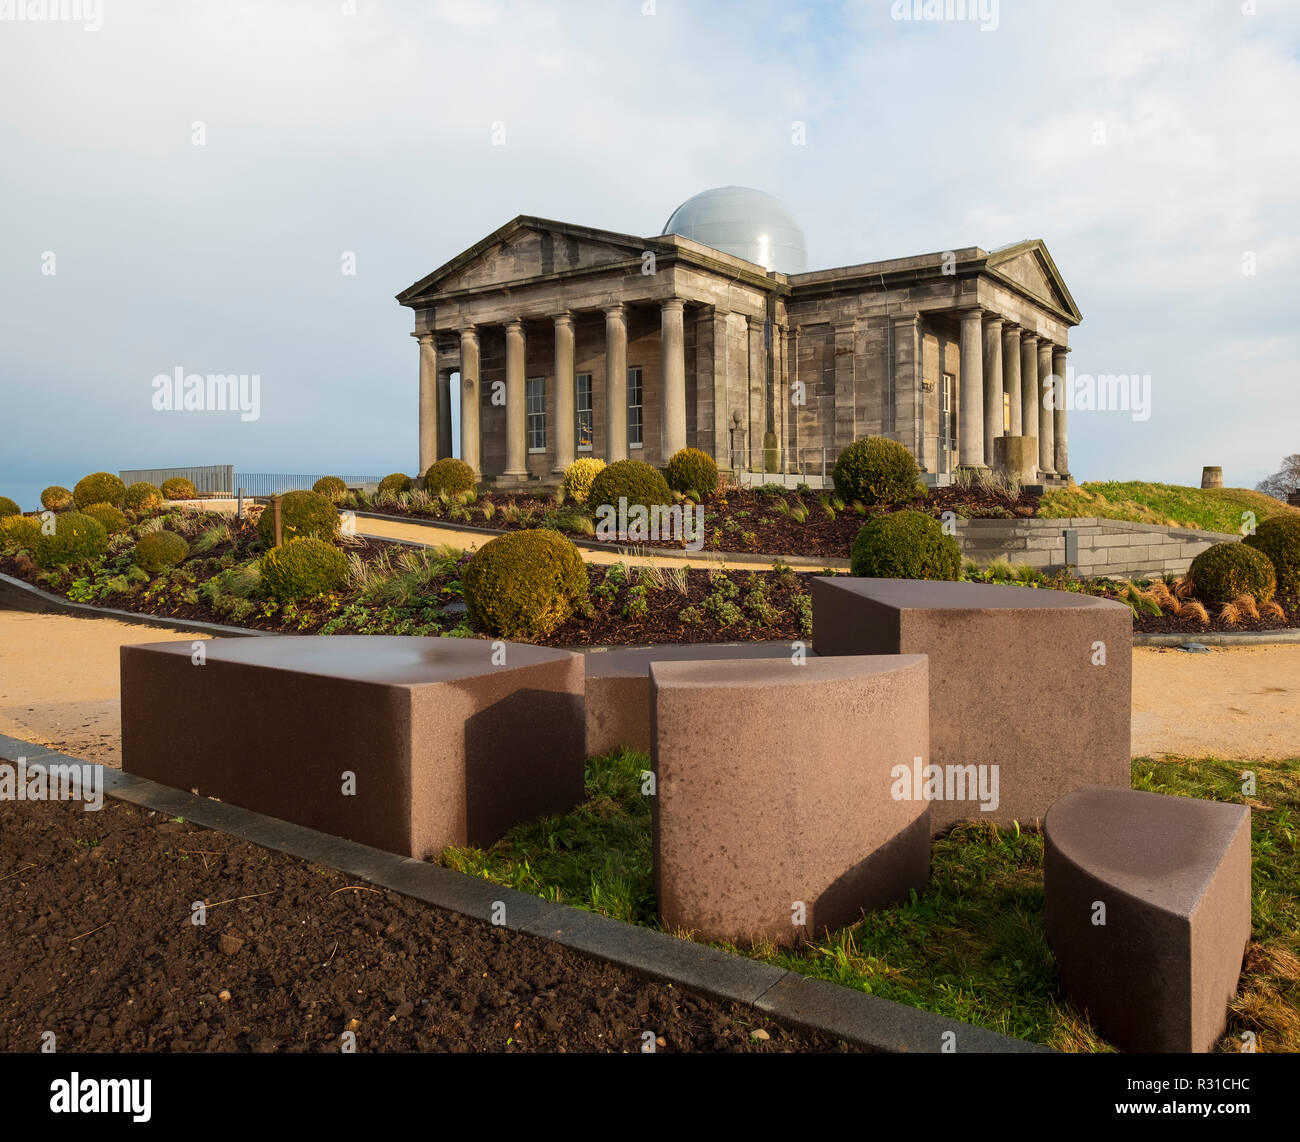 Edinburgh, Scotland, UK. 21 November, 2018. The historic City Observatory on Calton Hill will reopen as The Collective, an arts organisation and will feature the restored City Observatory, City Dome, and a purpose-built exhibition space as well as The Lookout , a new restaurant run by The Gardener's Cottage owners. It opens to the public on 24 November, 2018. Credit: Iain Masterton/Alamy Live News Stock Photo